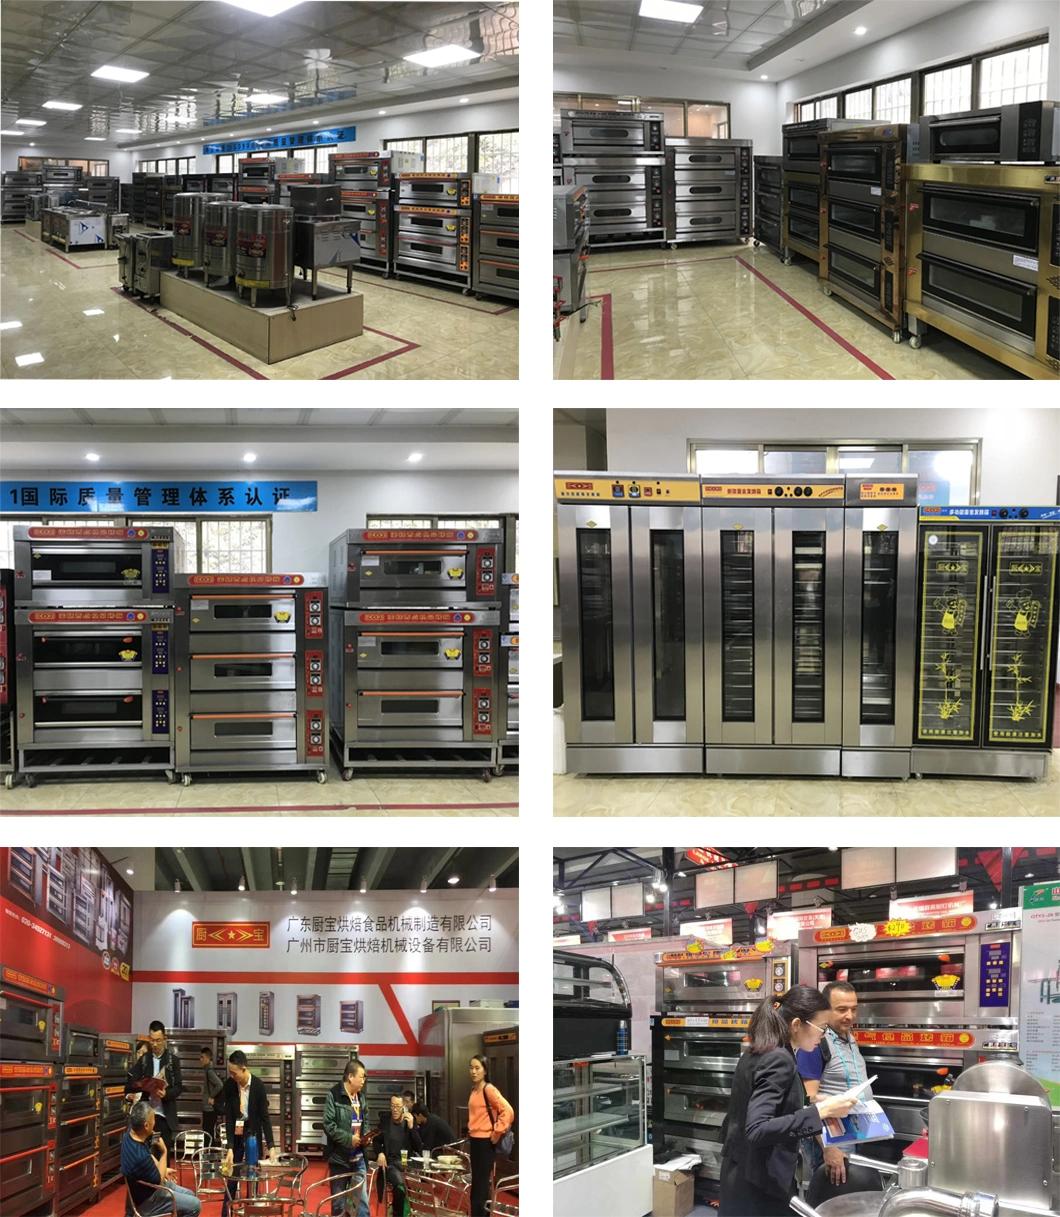 Commercial Kitchen of Baking Equipment 1 Deck 2 Tray Gas Oven